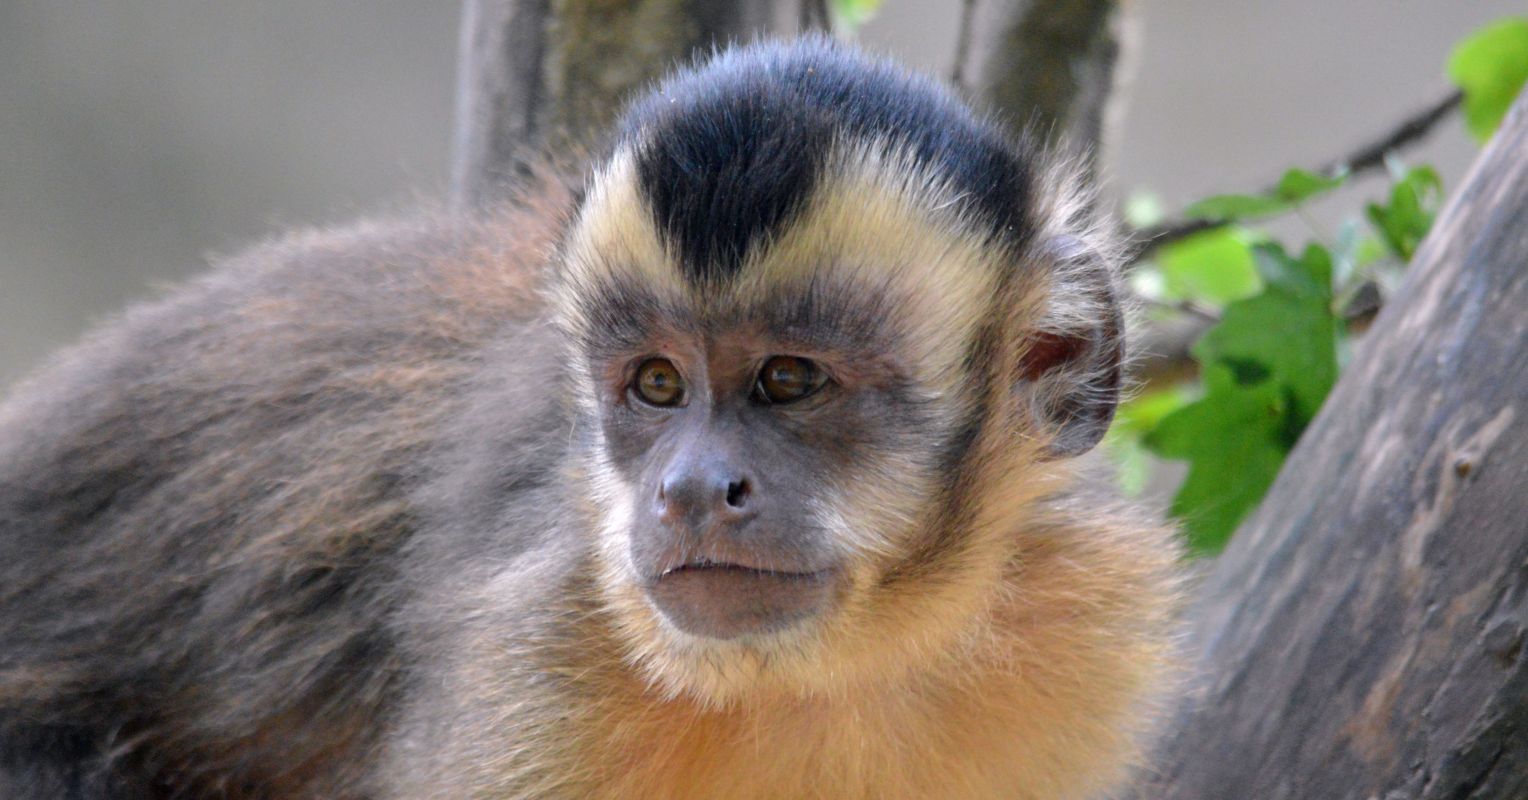 Why Do Monkeys Rub Themselves, and Others, With Onions? Psychology Today